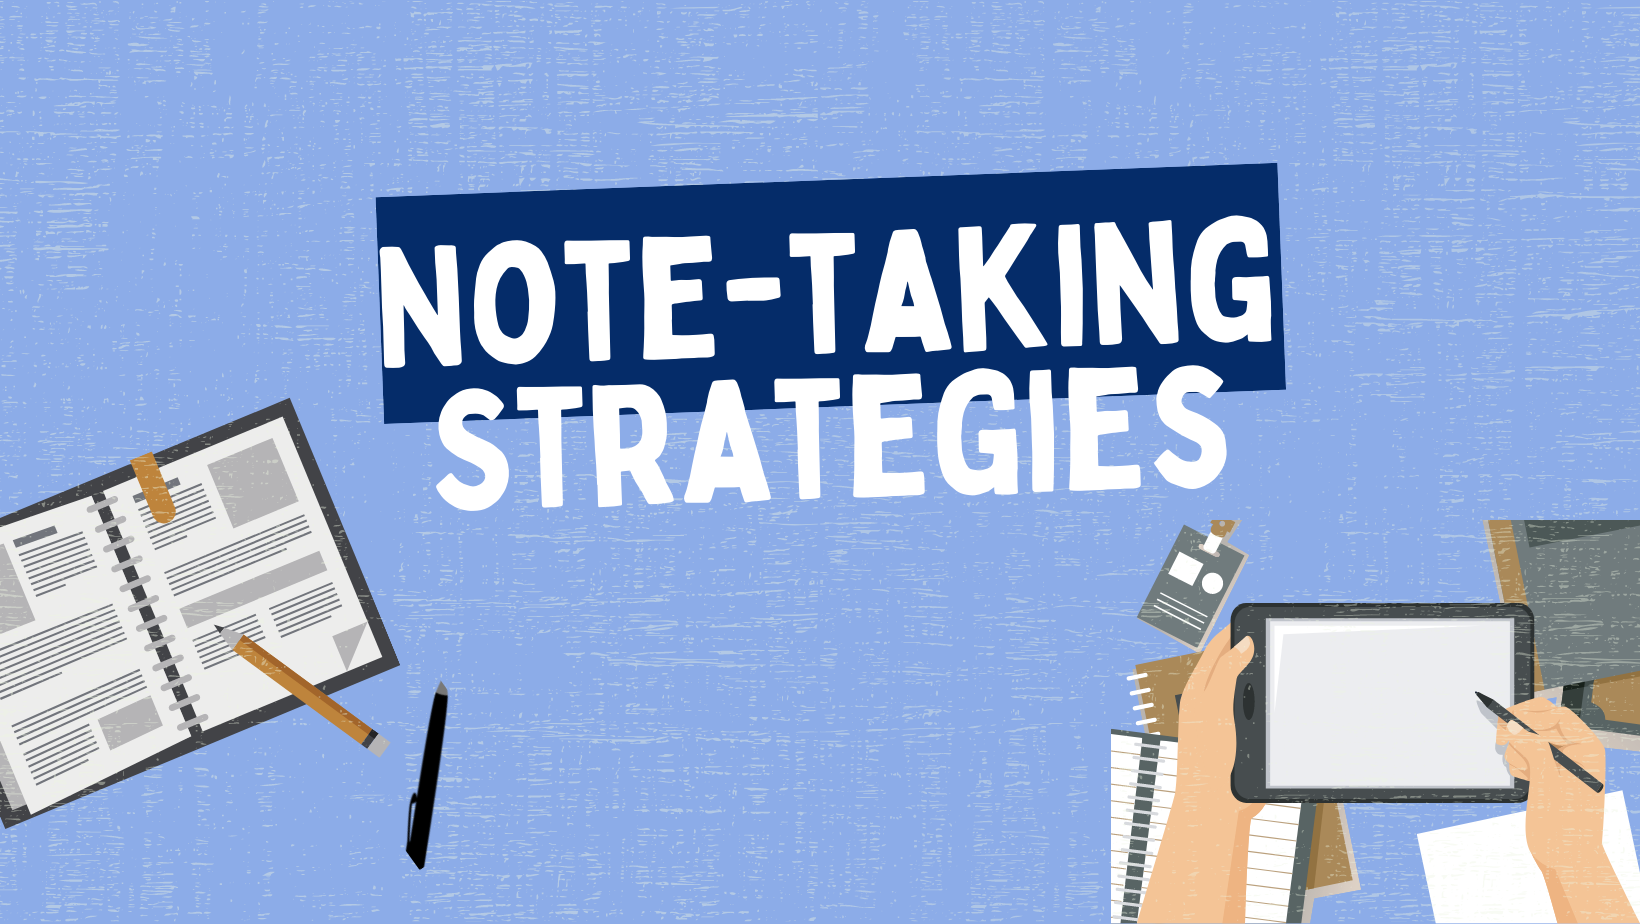 "Note-Taking Strategies" on blue background with grpahic of a notebook, pencil, and pen, and hands taking notes on an ipad.